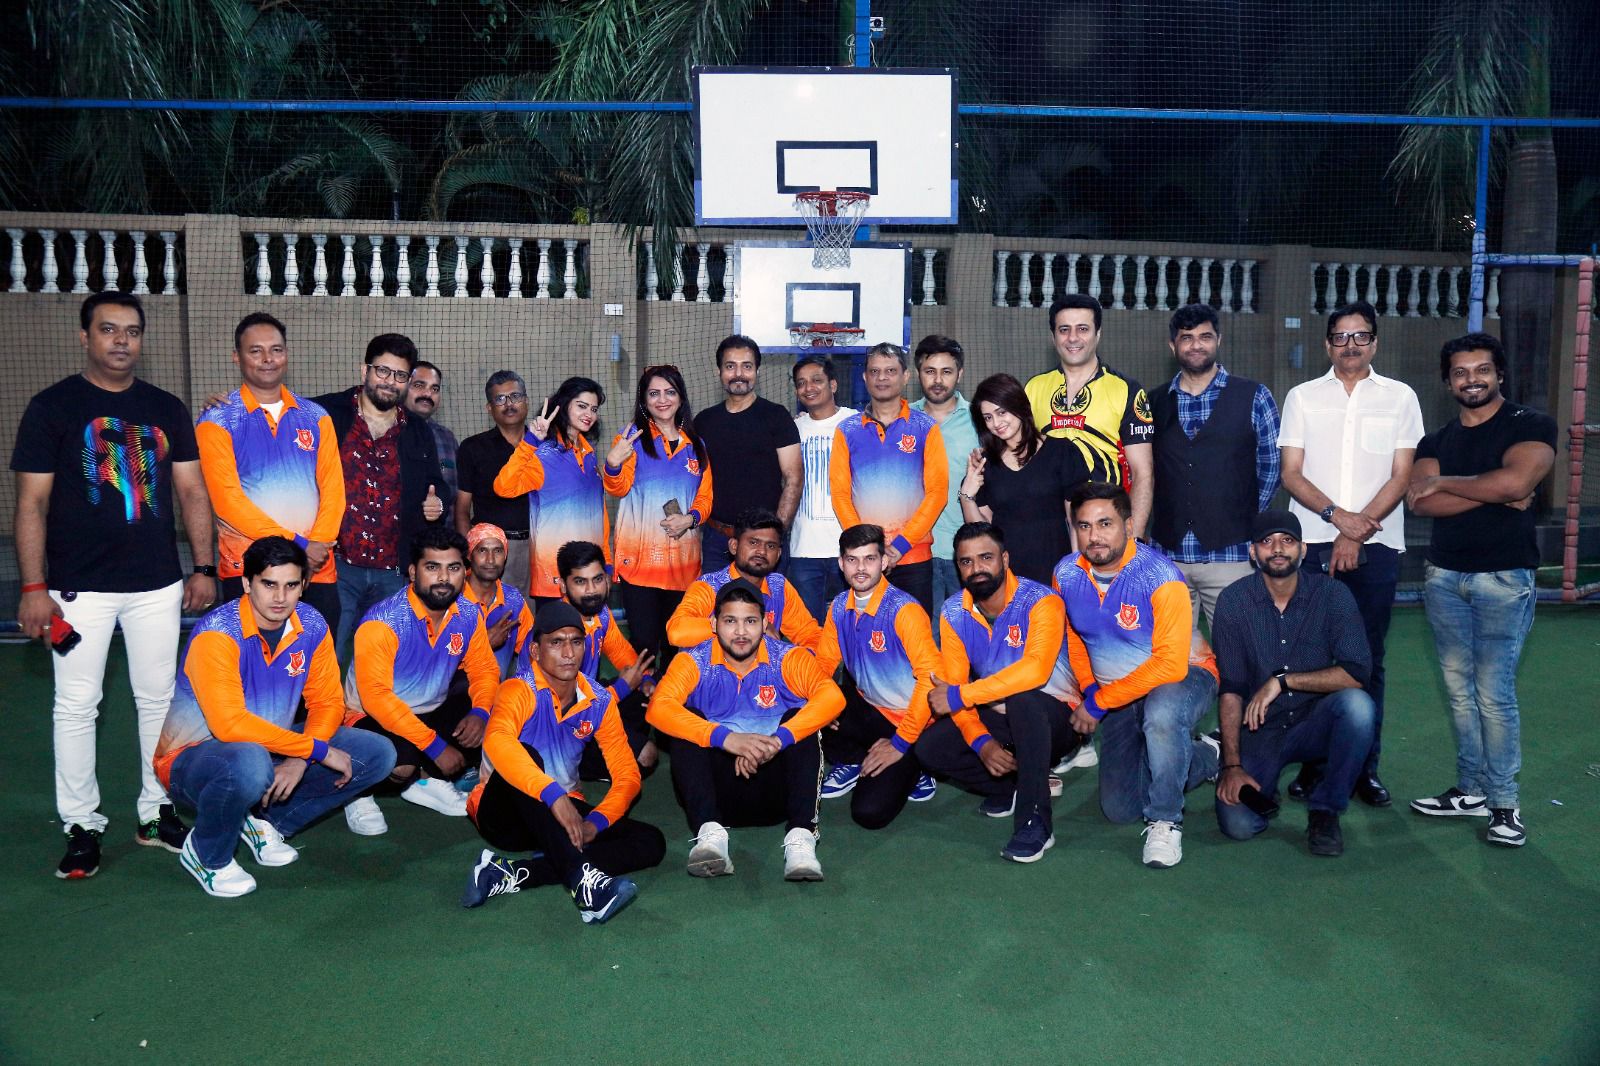 The inauguration ceremony of Cricket Team SHUBH SINGHAMS, presented by Shubh Media And Entertainment and Shubh Astha Foundation